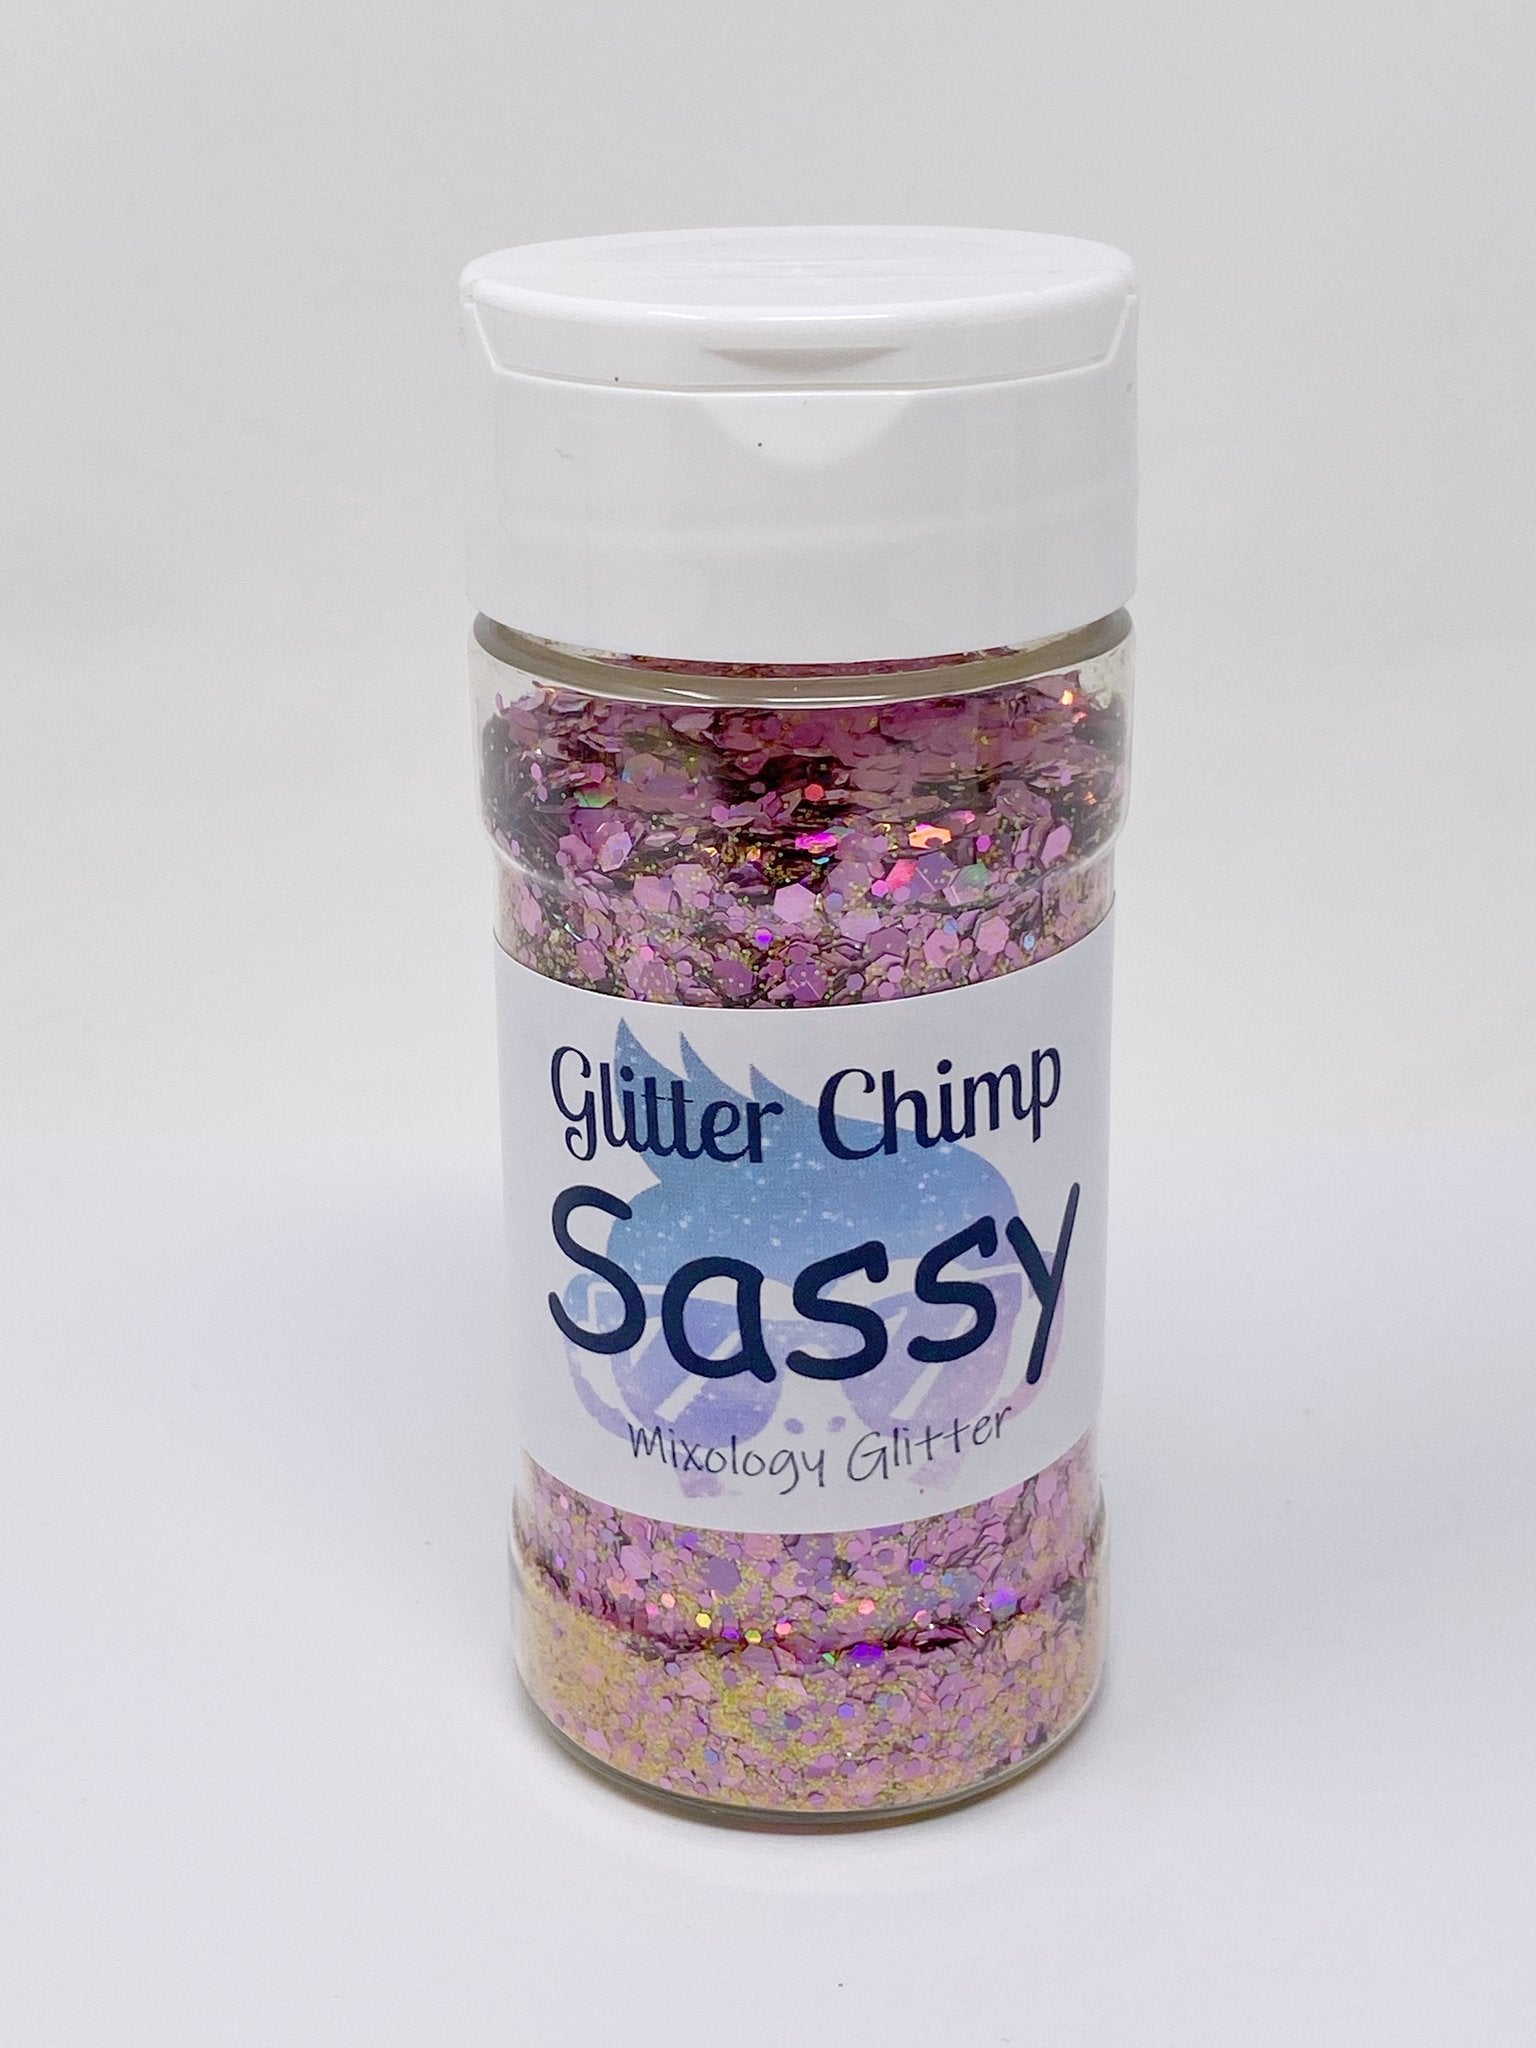 Glow With Envy Green Chunky Mix Glow in the Dark Glitter Polyester Glitter  